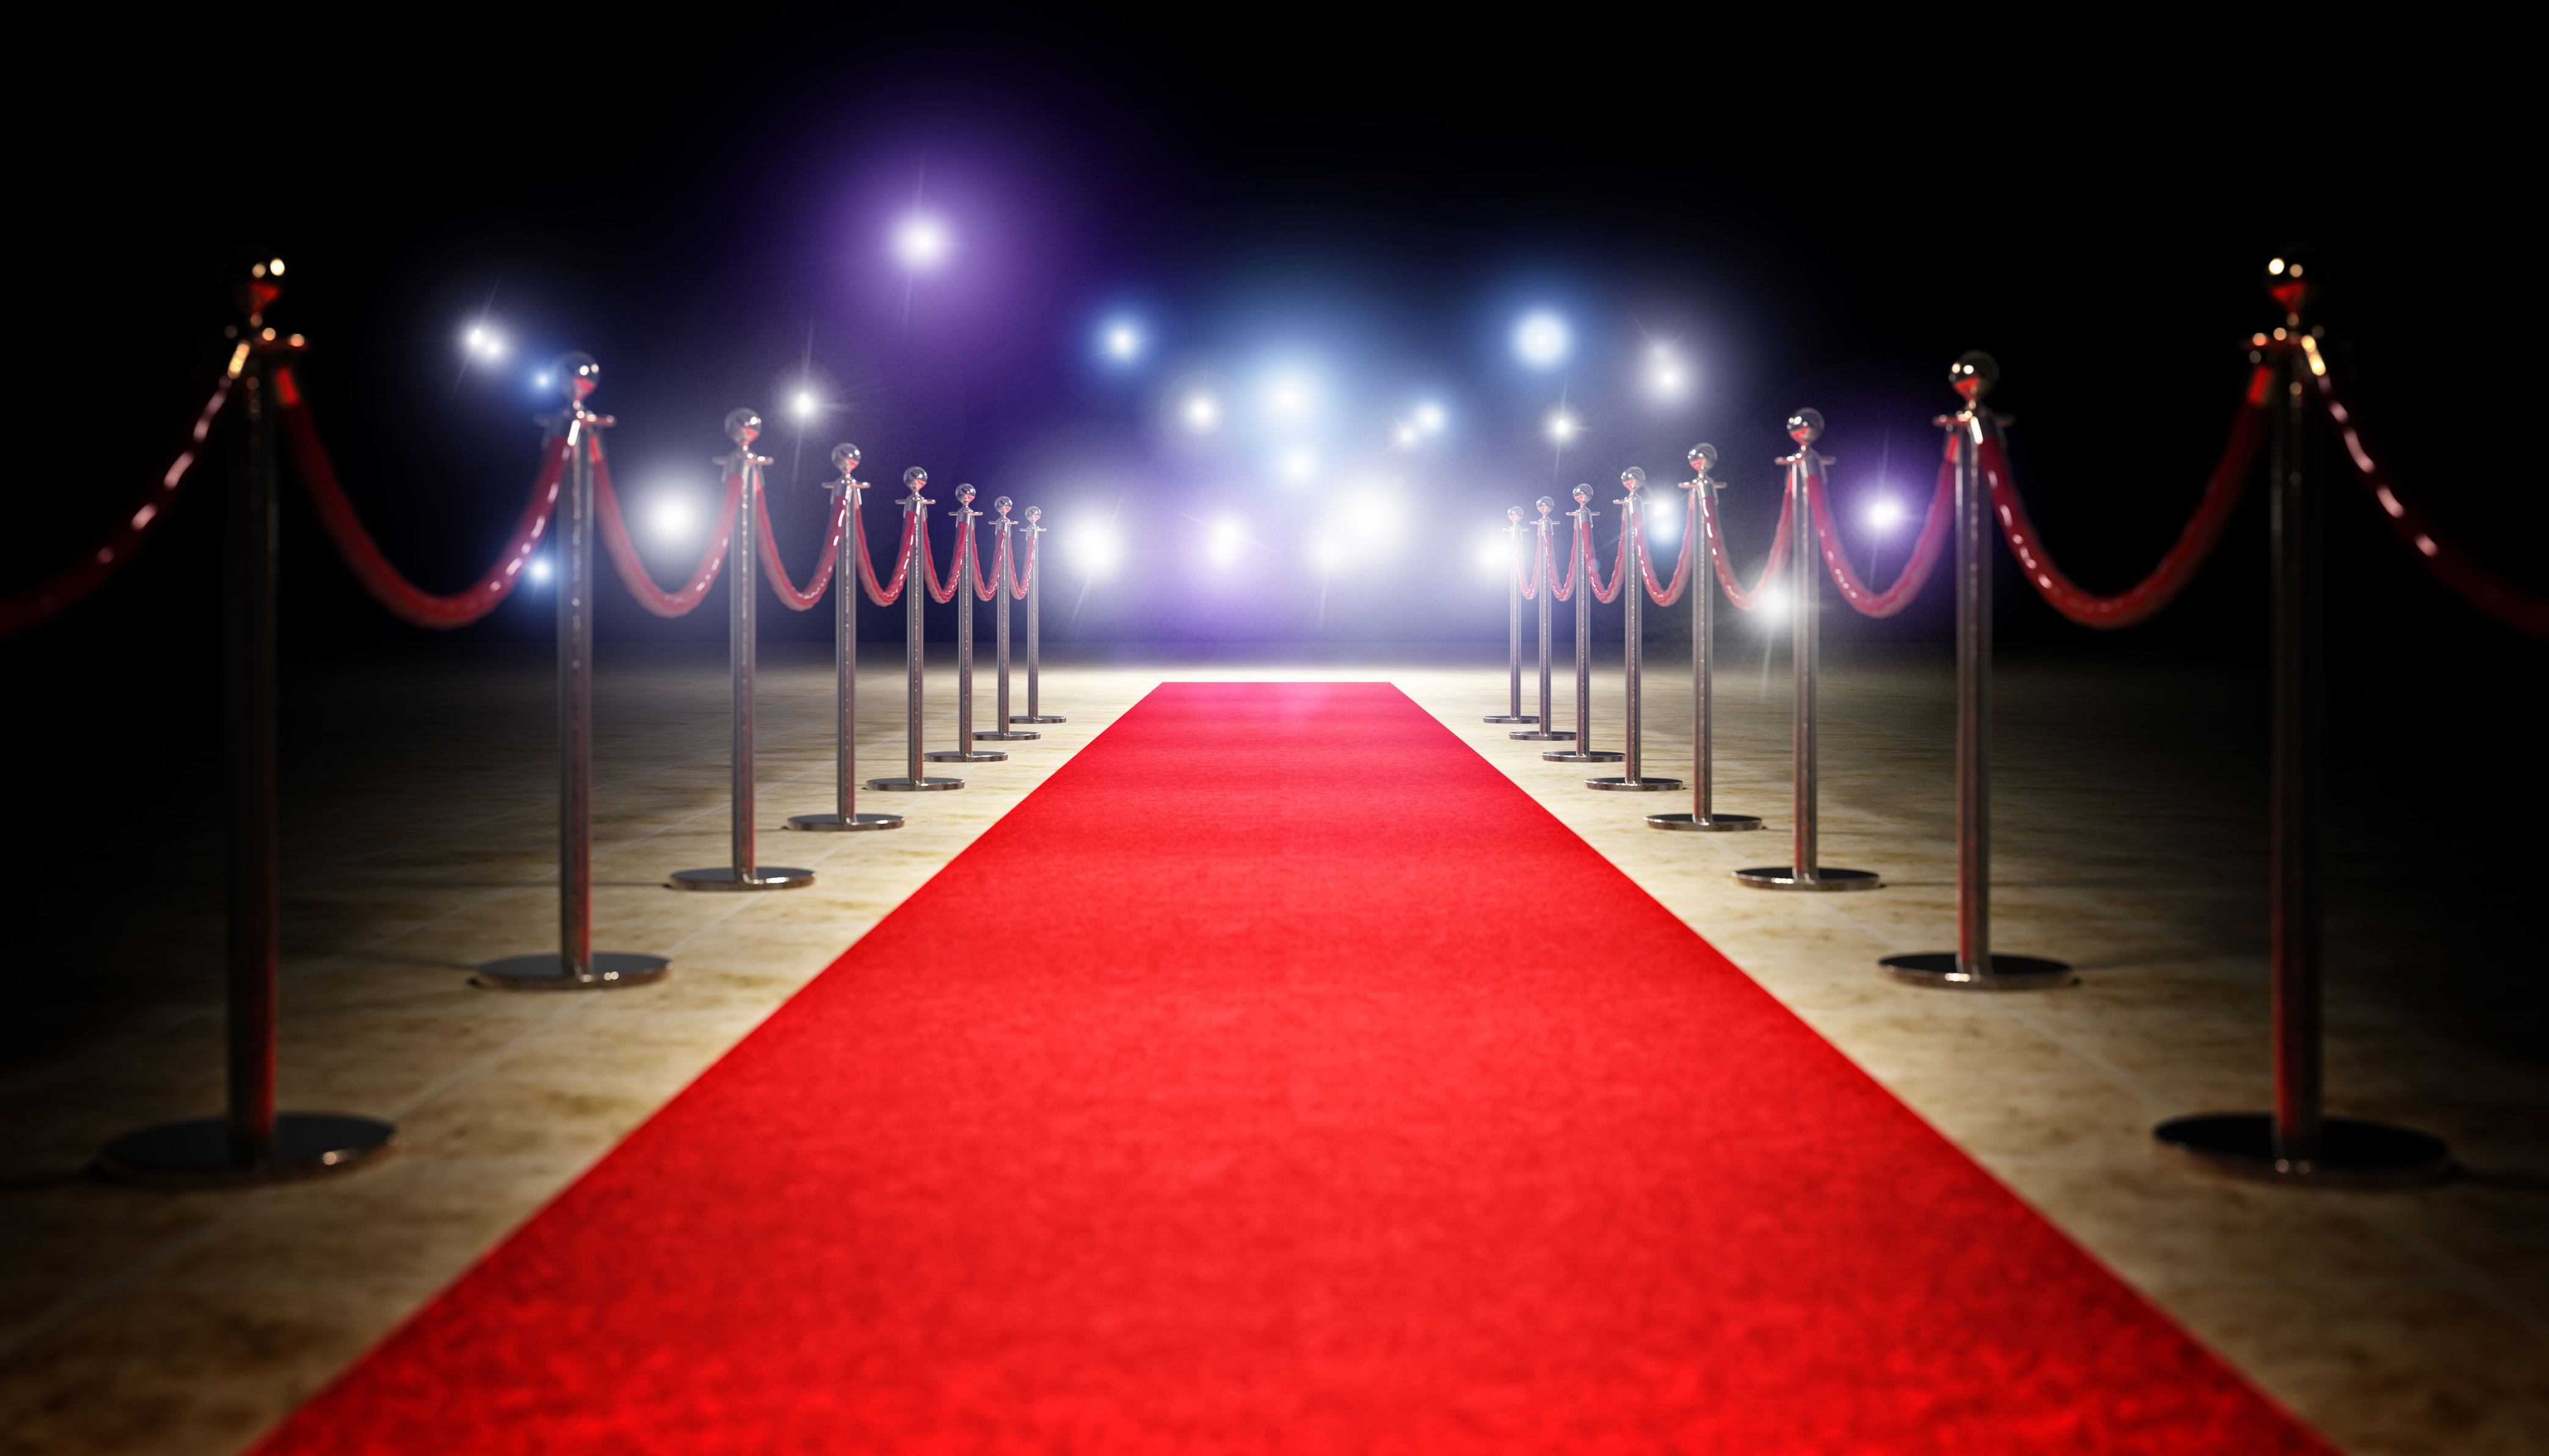 How to arrive at The Travel Awards Travel Weekly